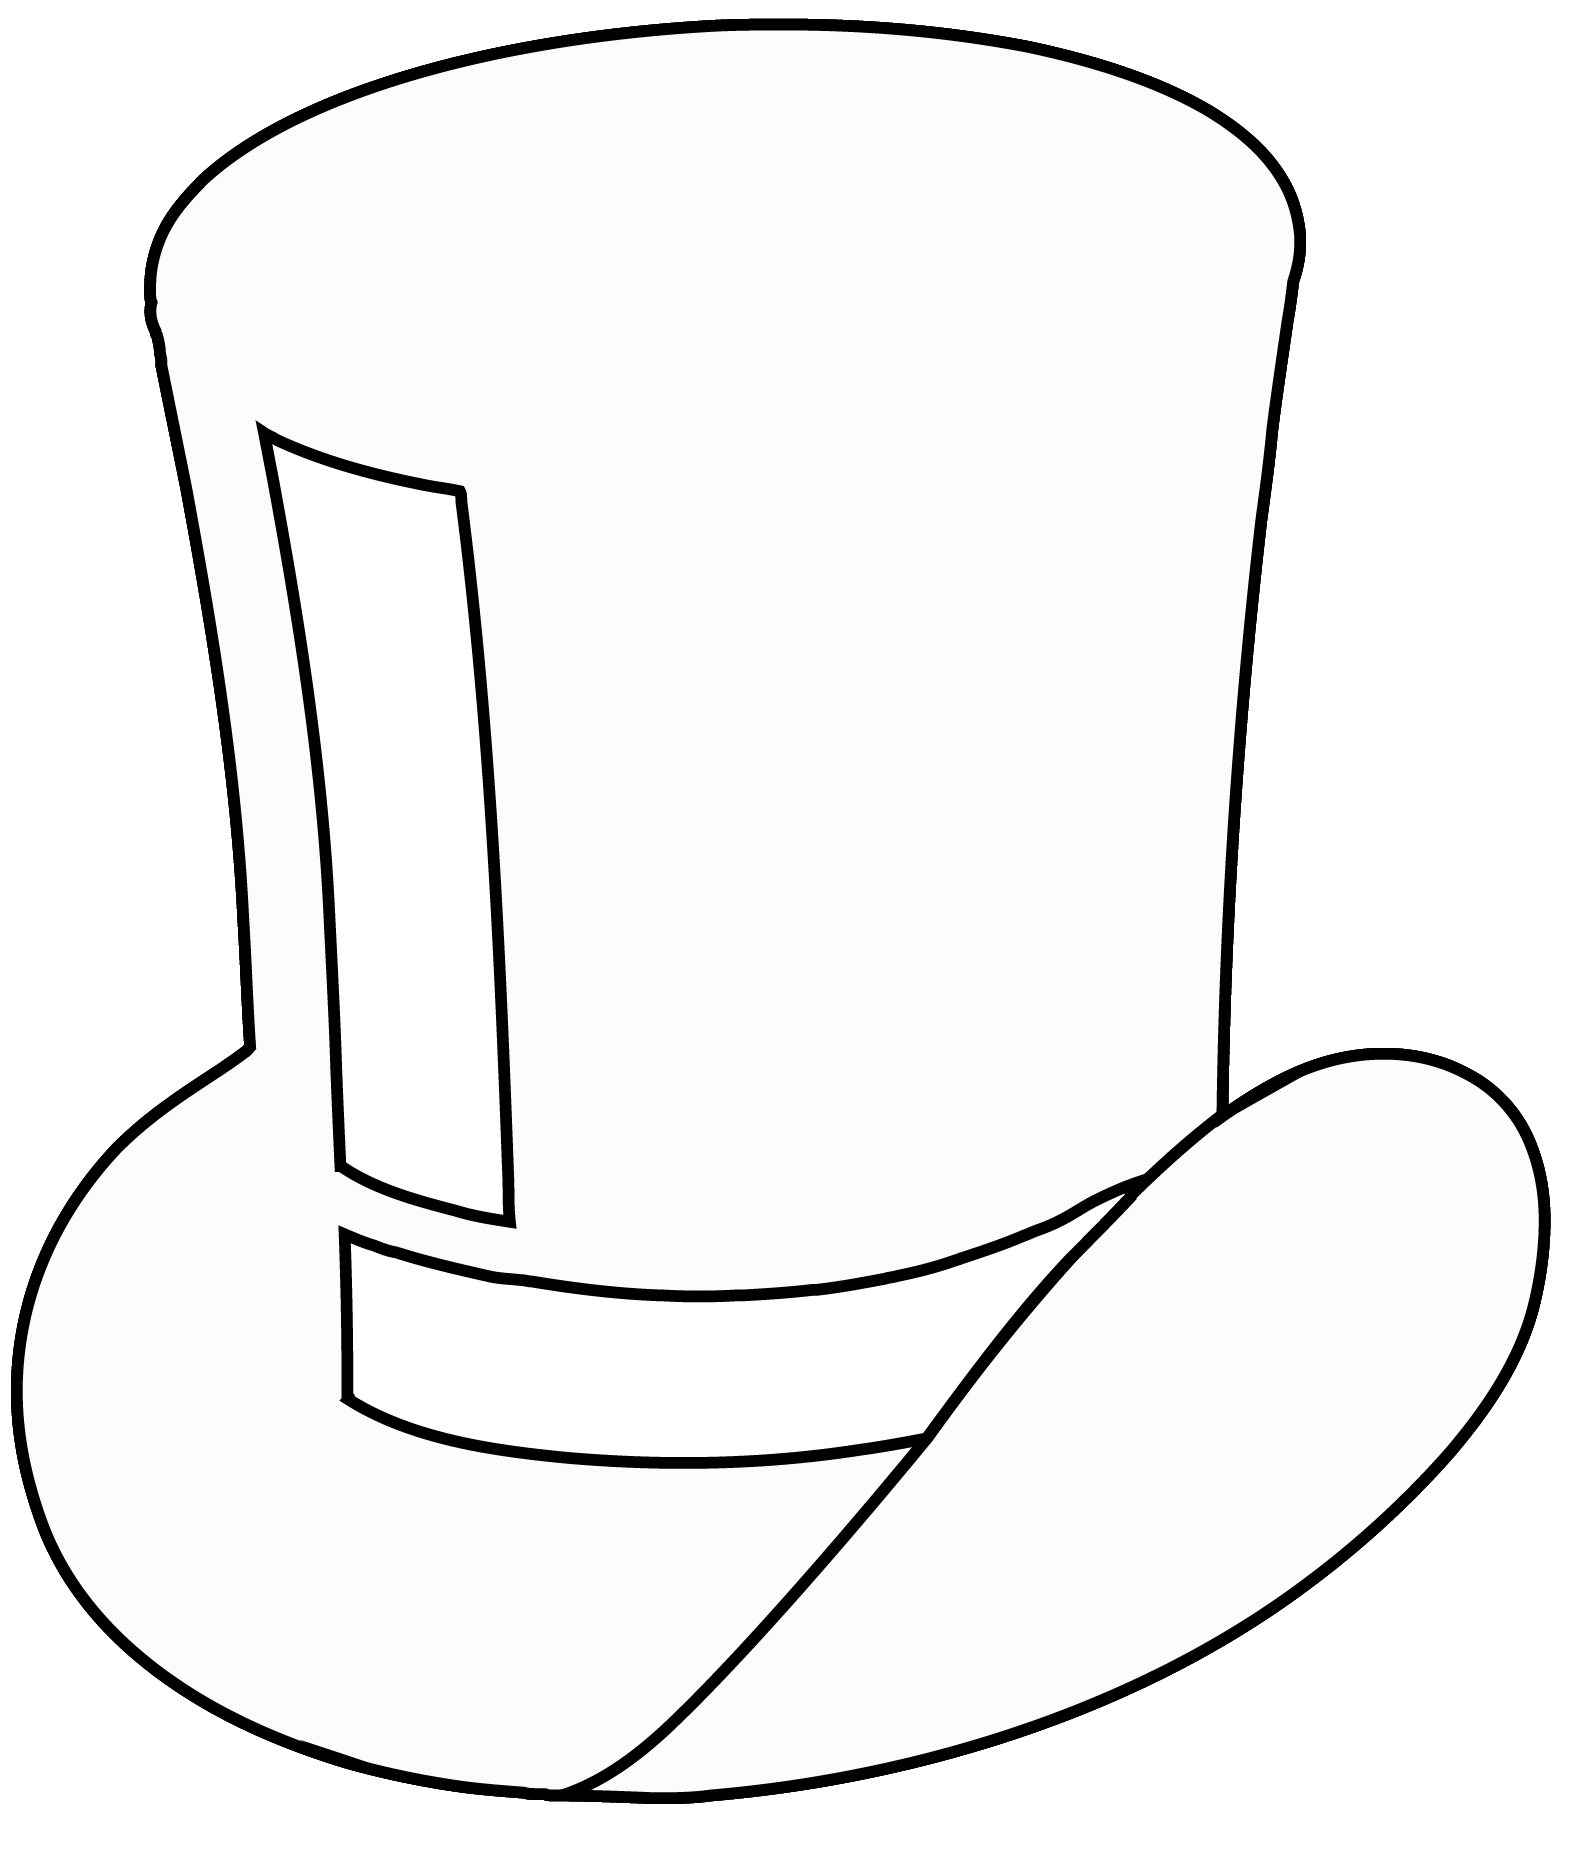 Top Hat Emoji coloring page - ColouringPages